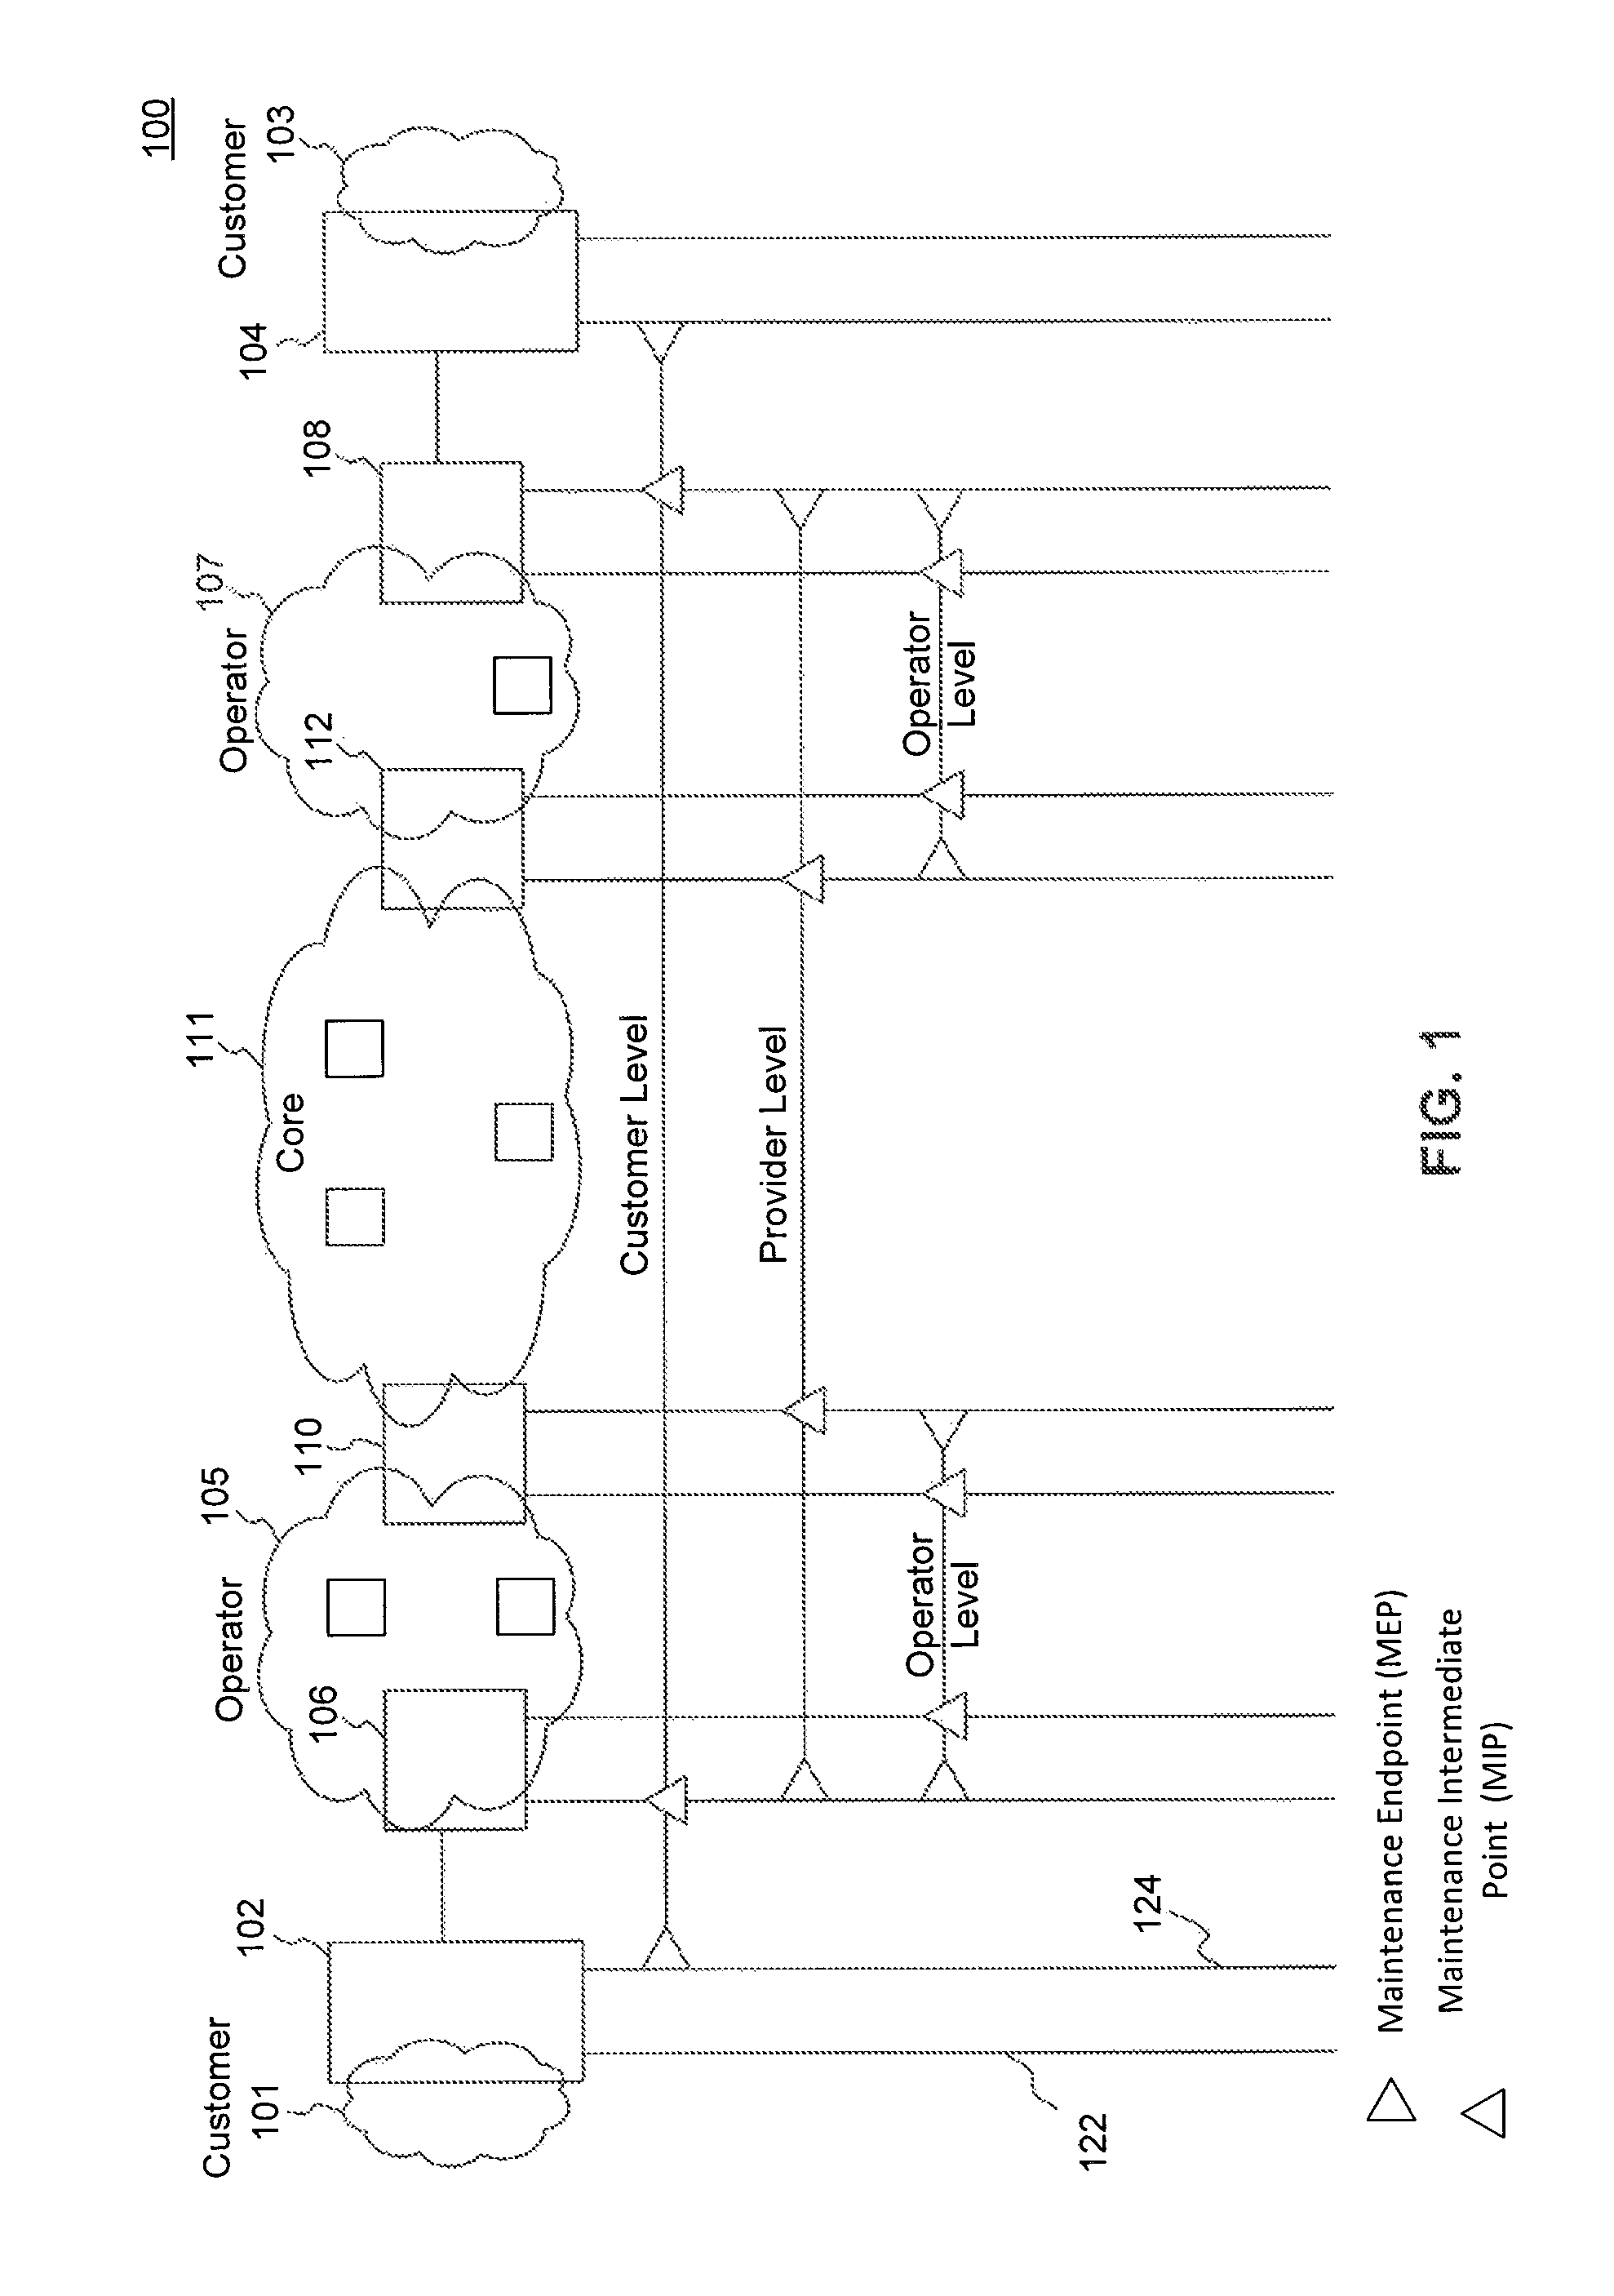 Ethernet operation and maintenance (OAM) with flexible forwarding